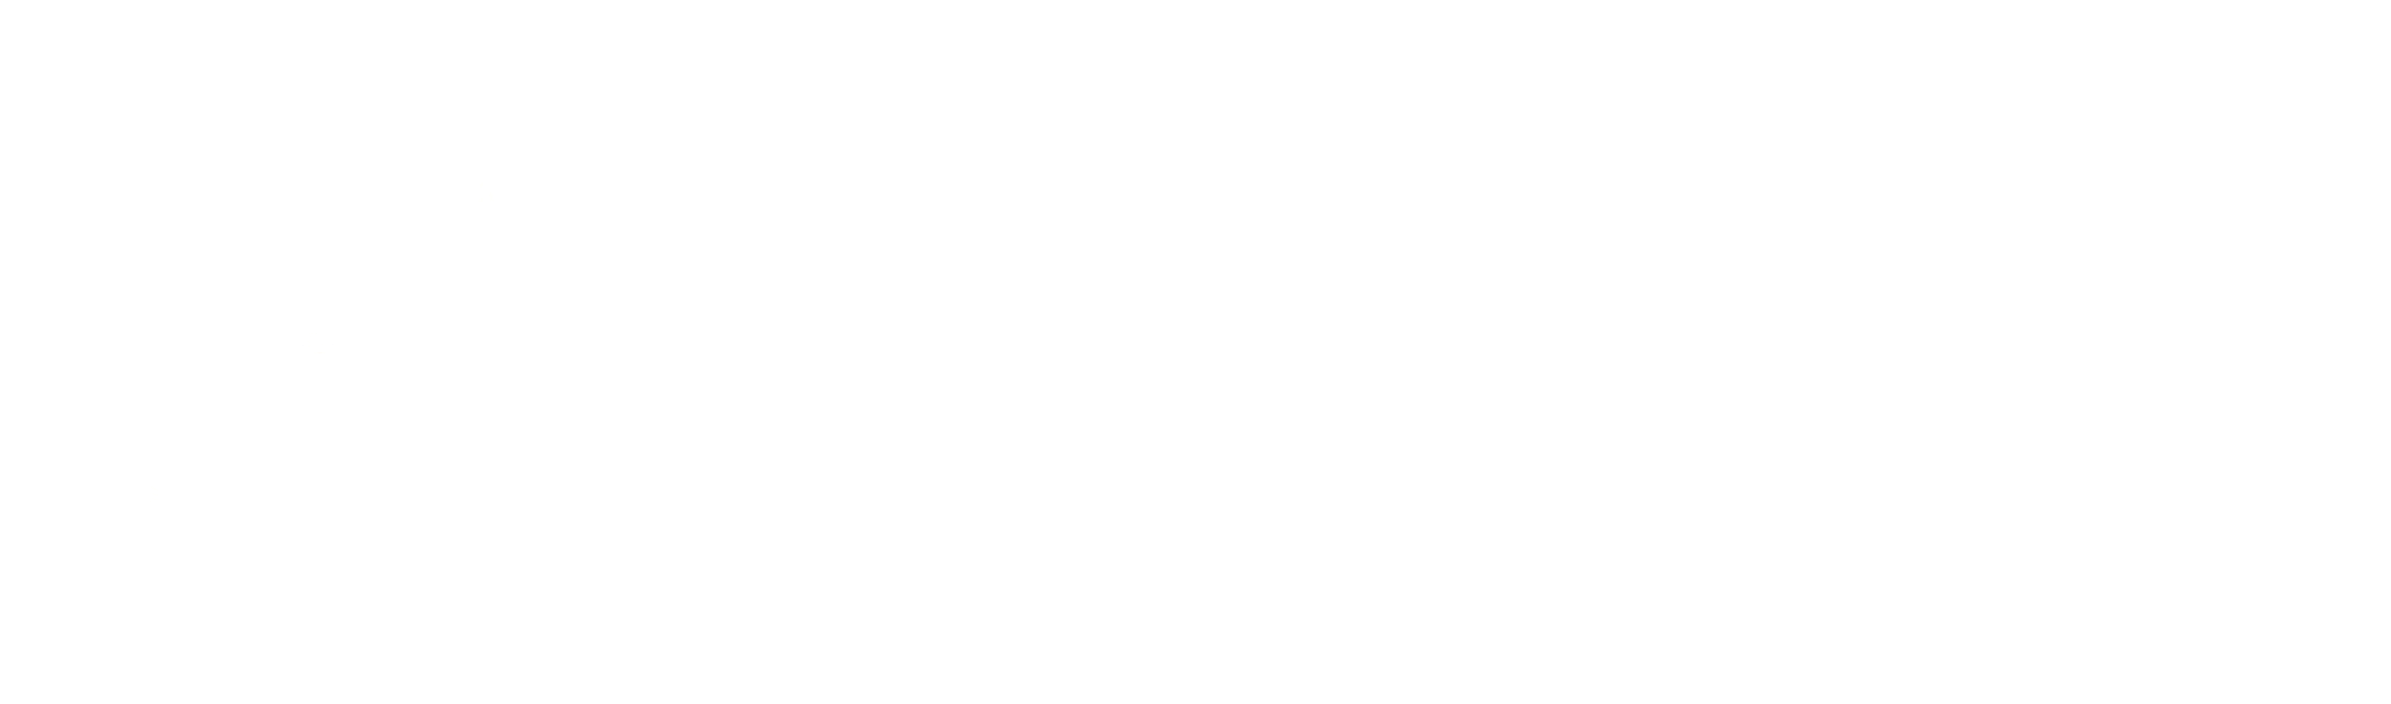 Little Shed Events